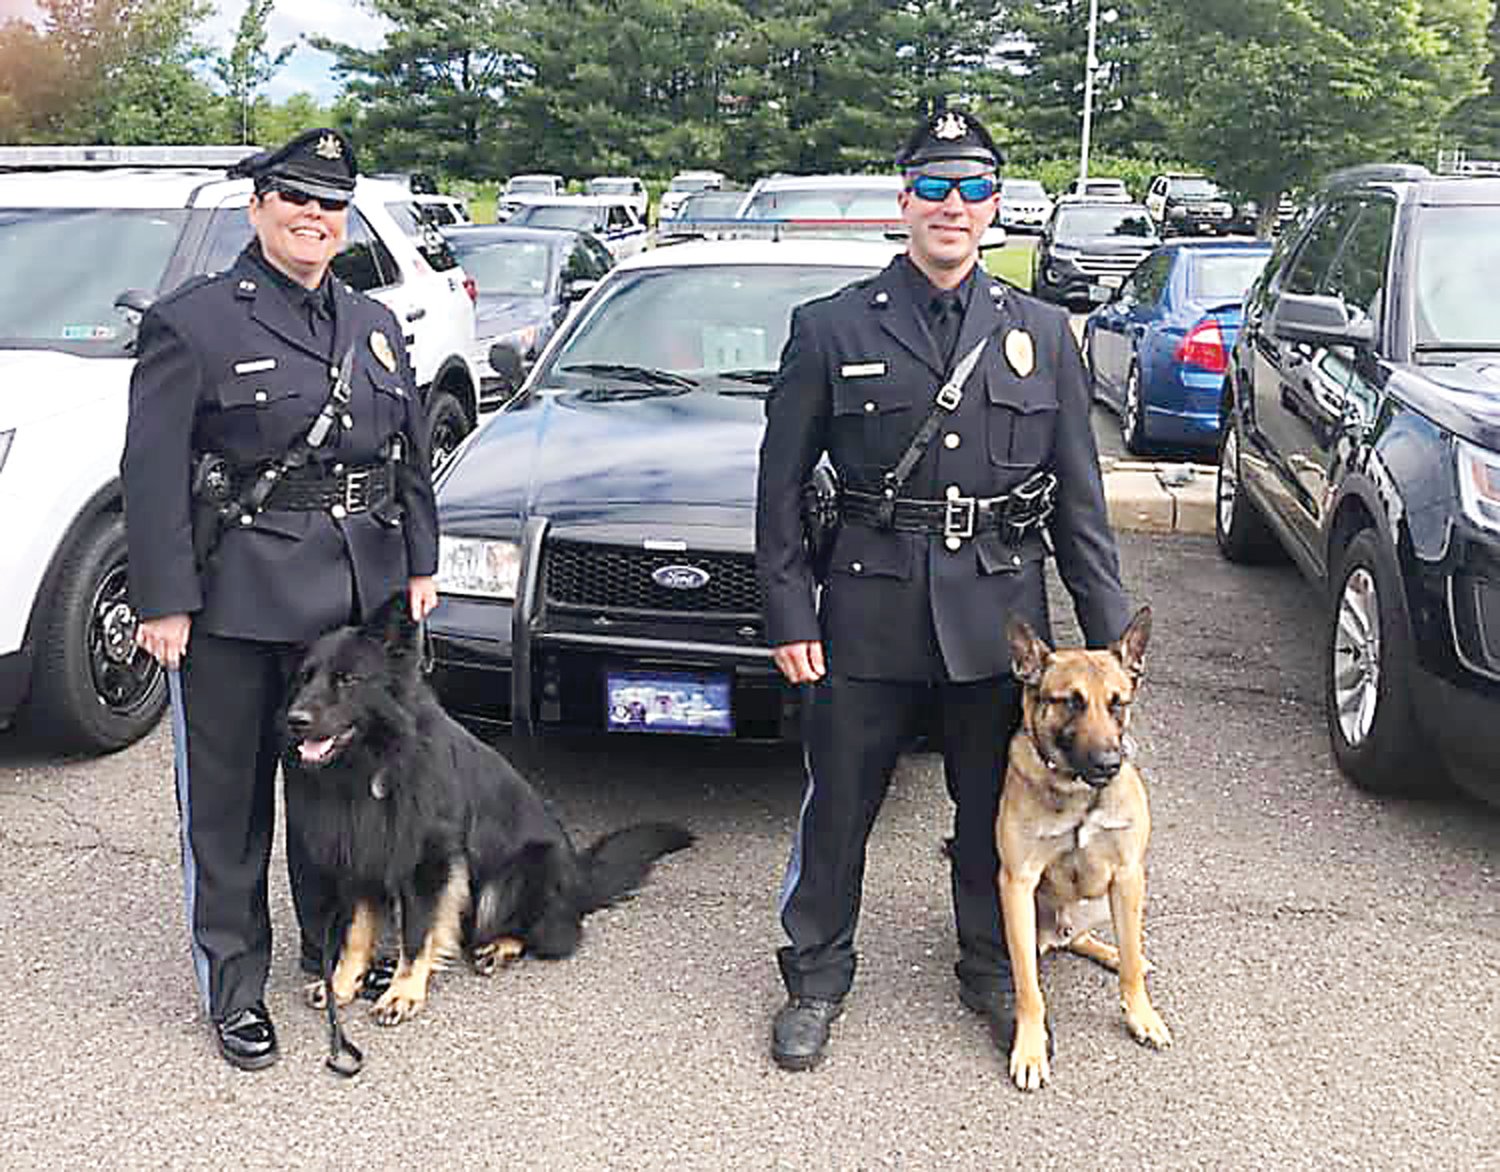 Middletown police officers Felt and Clawson with their K-9s.